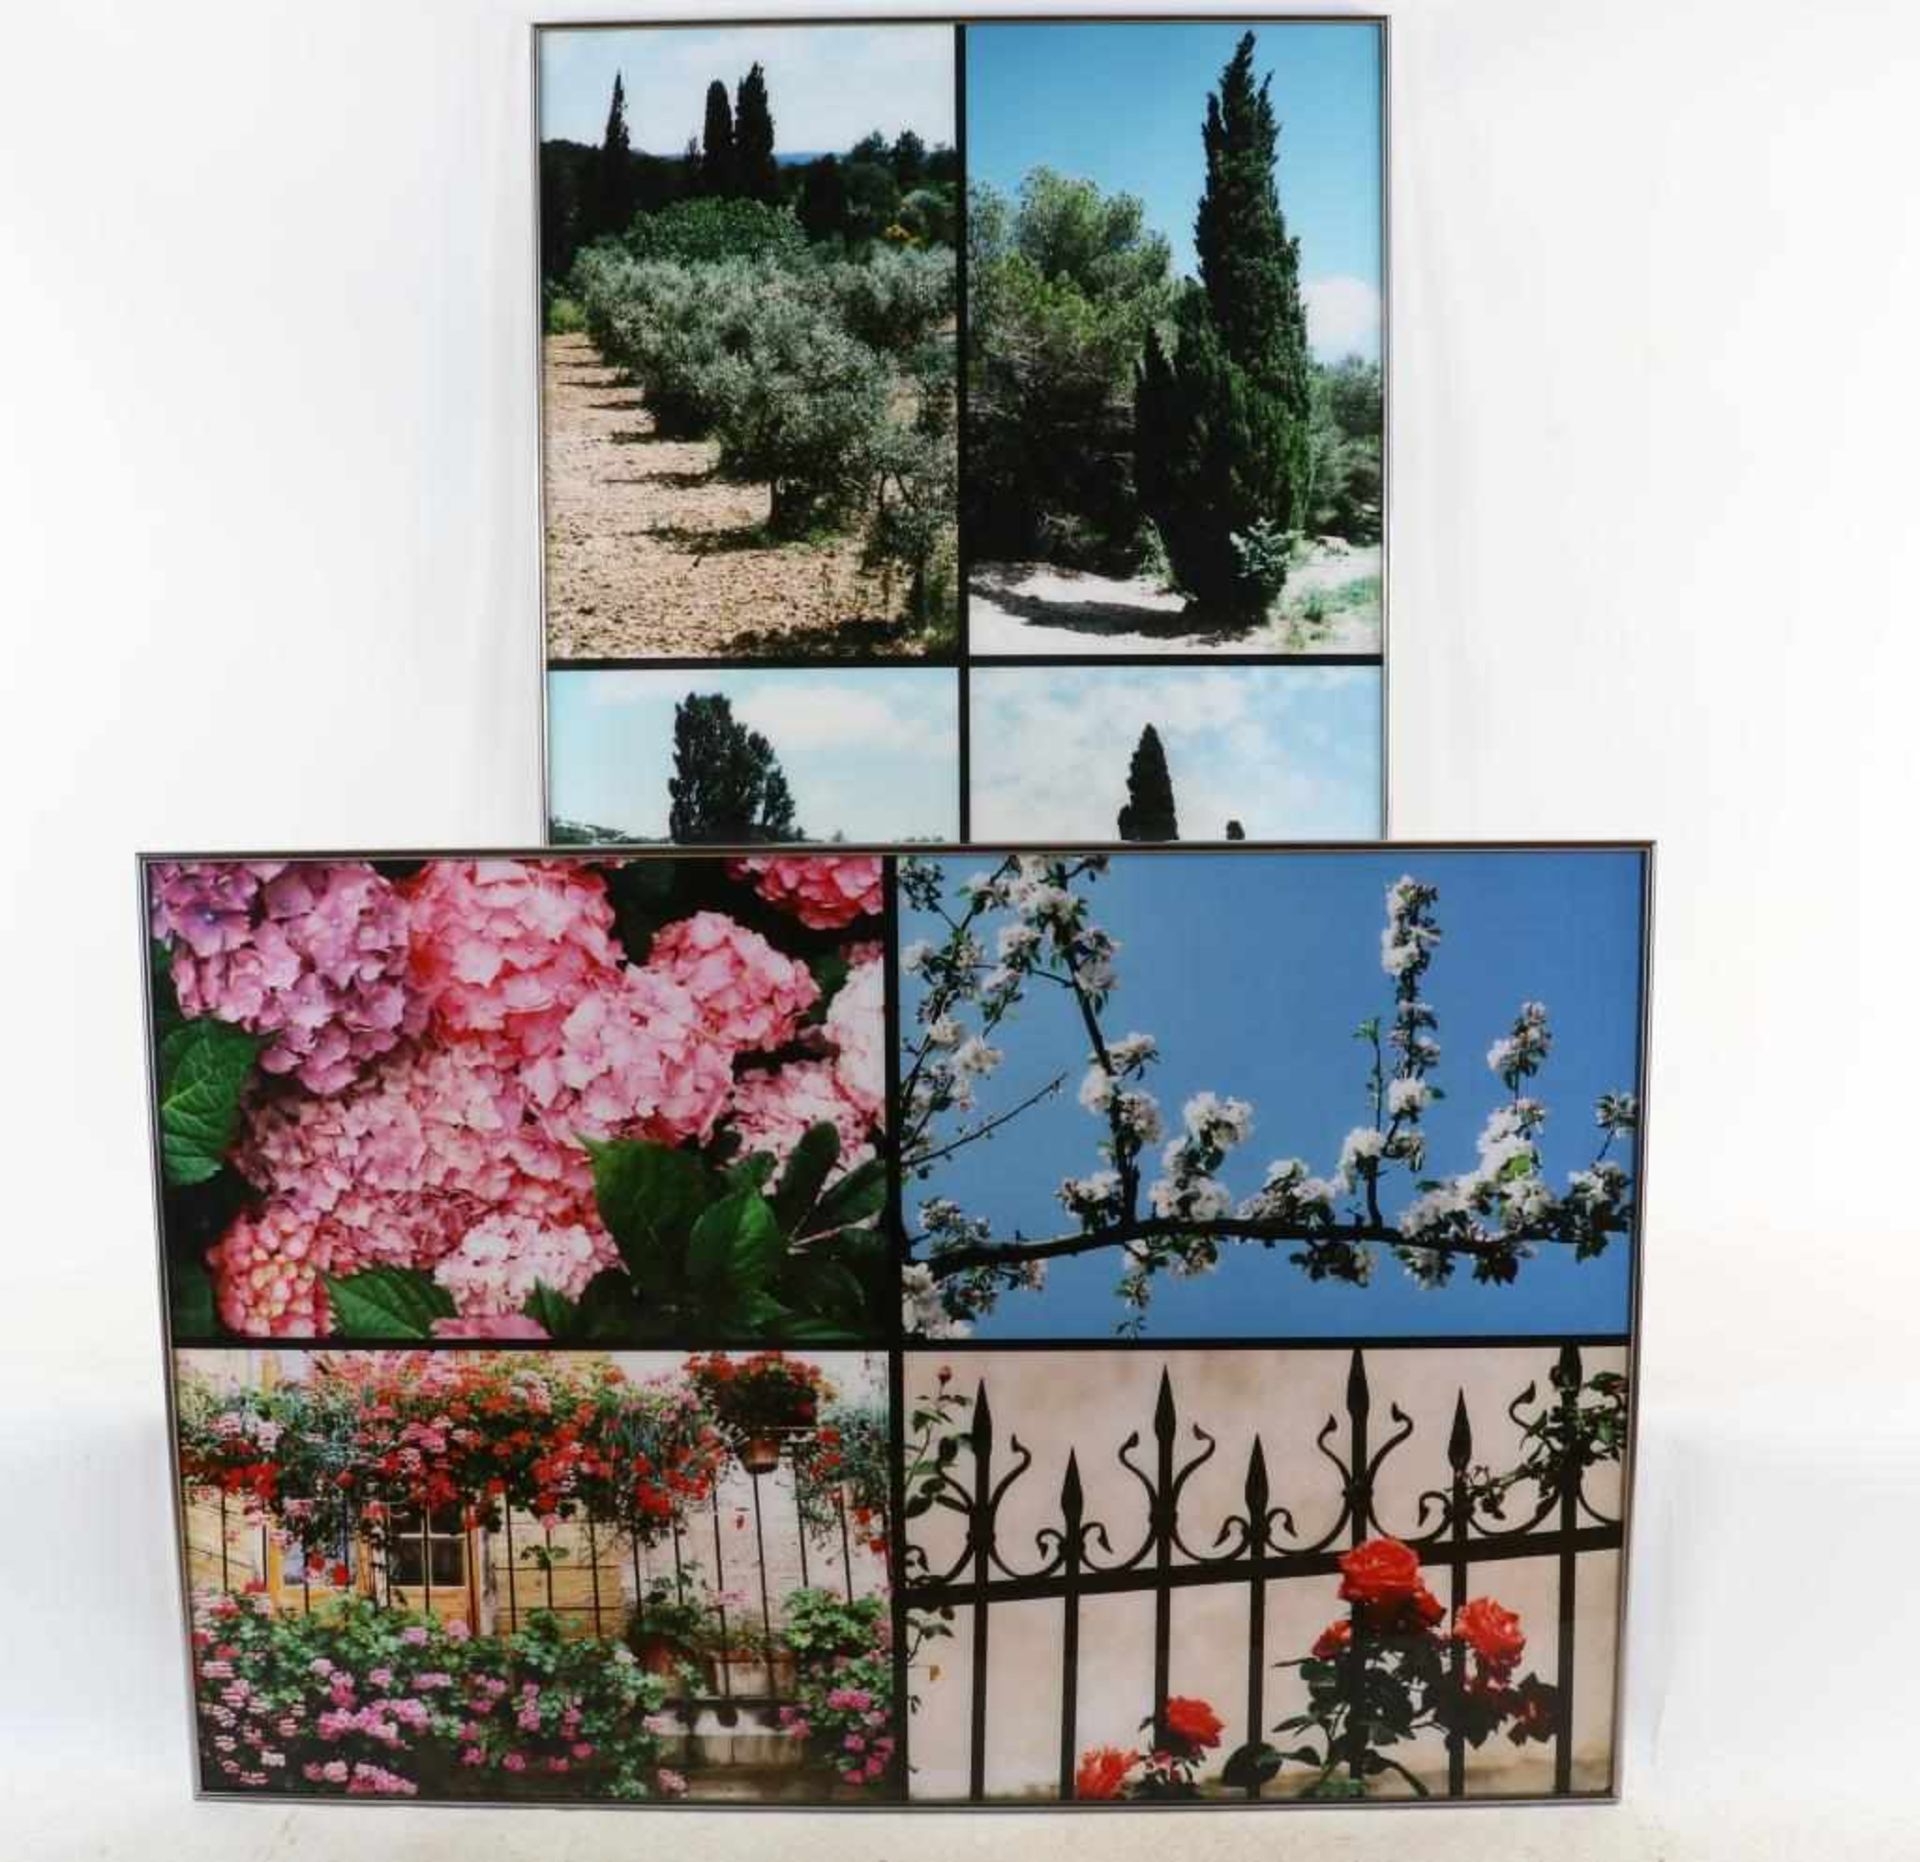 Huf, Paul (1924-2002), Blossom, olive trees and cypresses, 2 compilations of photographs 120 x 80